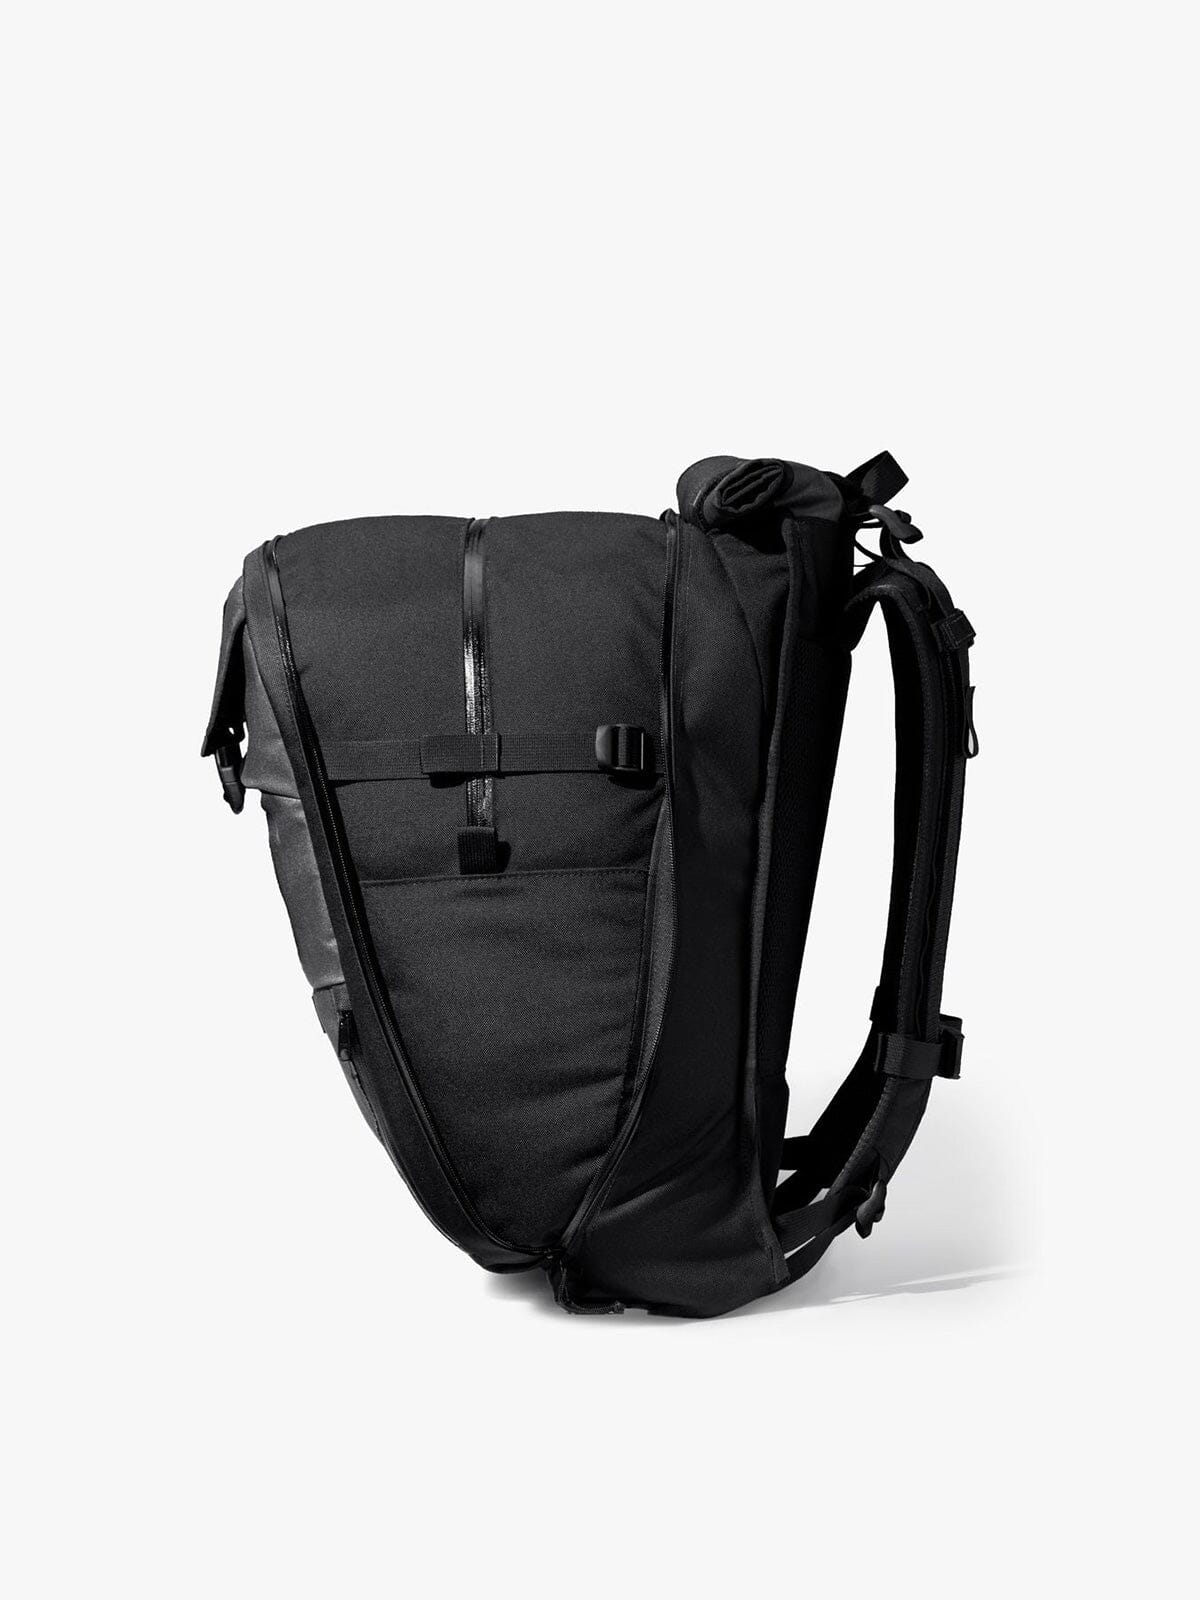 Rambler by Mission Workshop - Weatherproof Bags & Technical Apparel - San Francisco & Los Angeles - Built to endure - Guaranteed forever